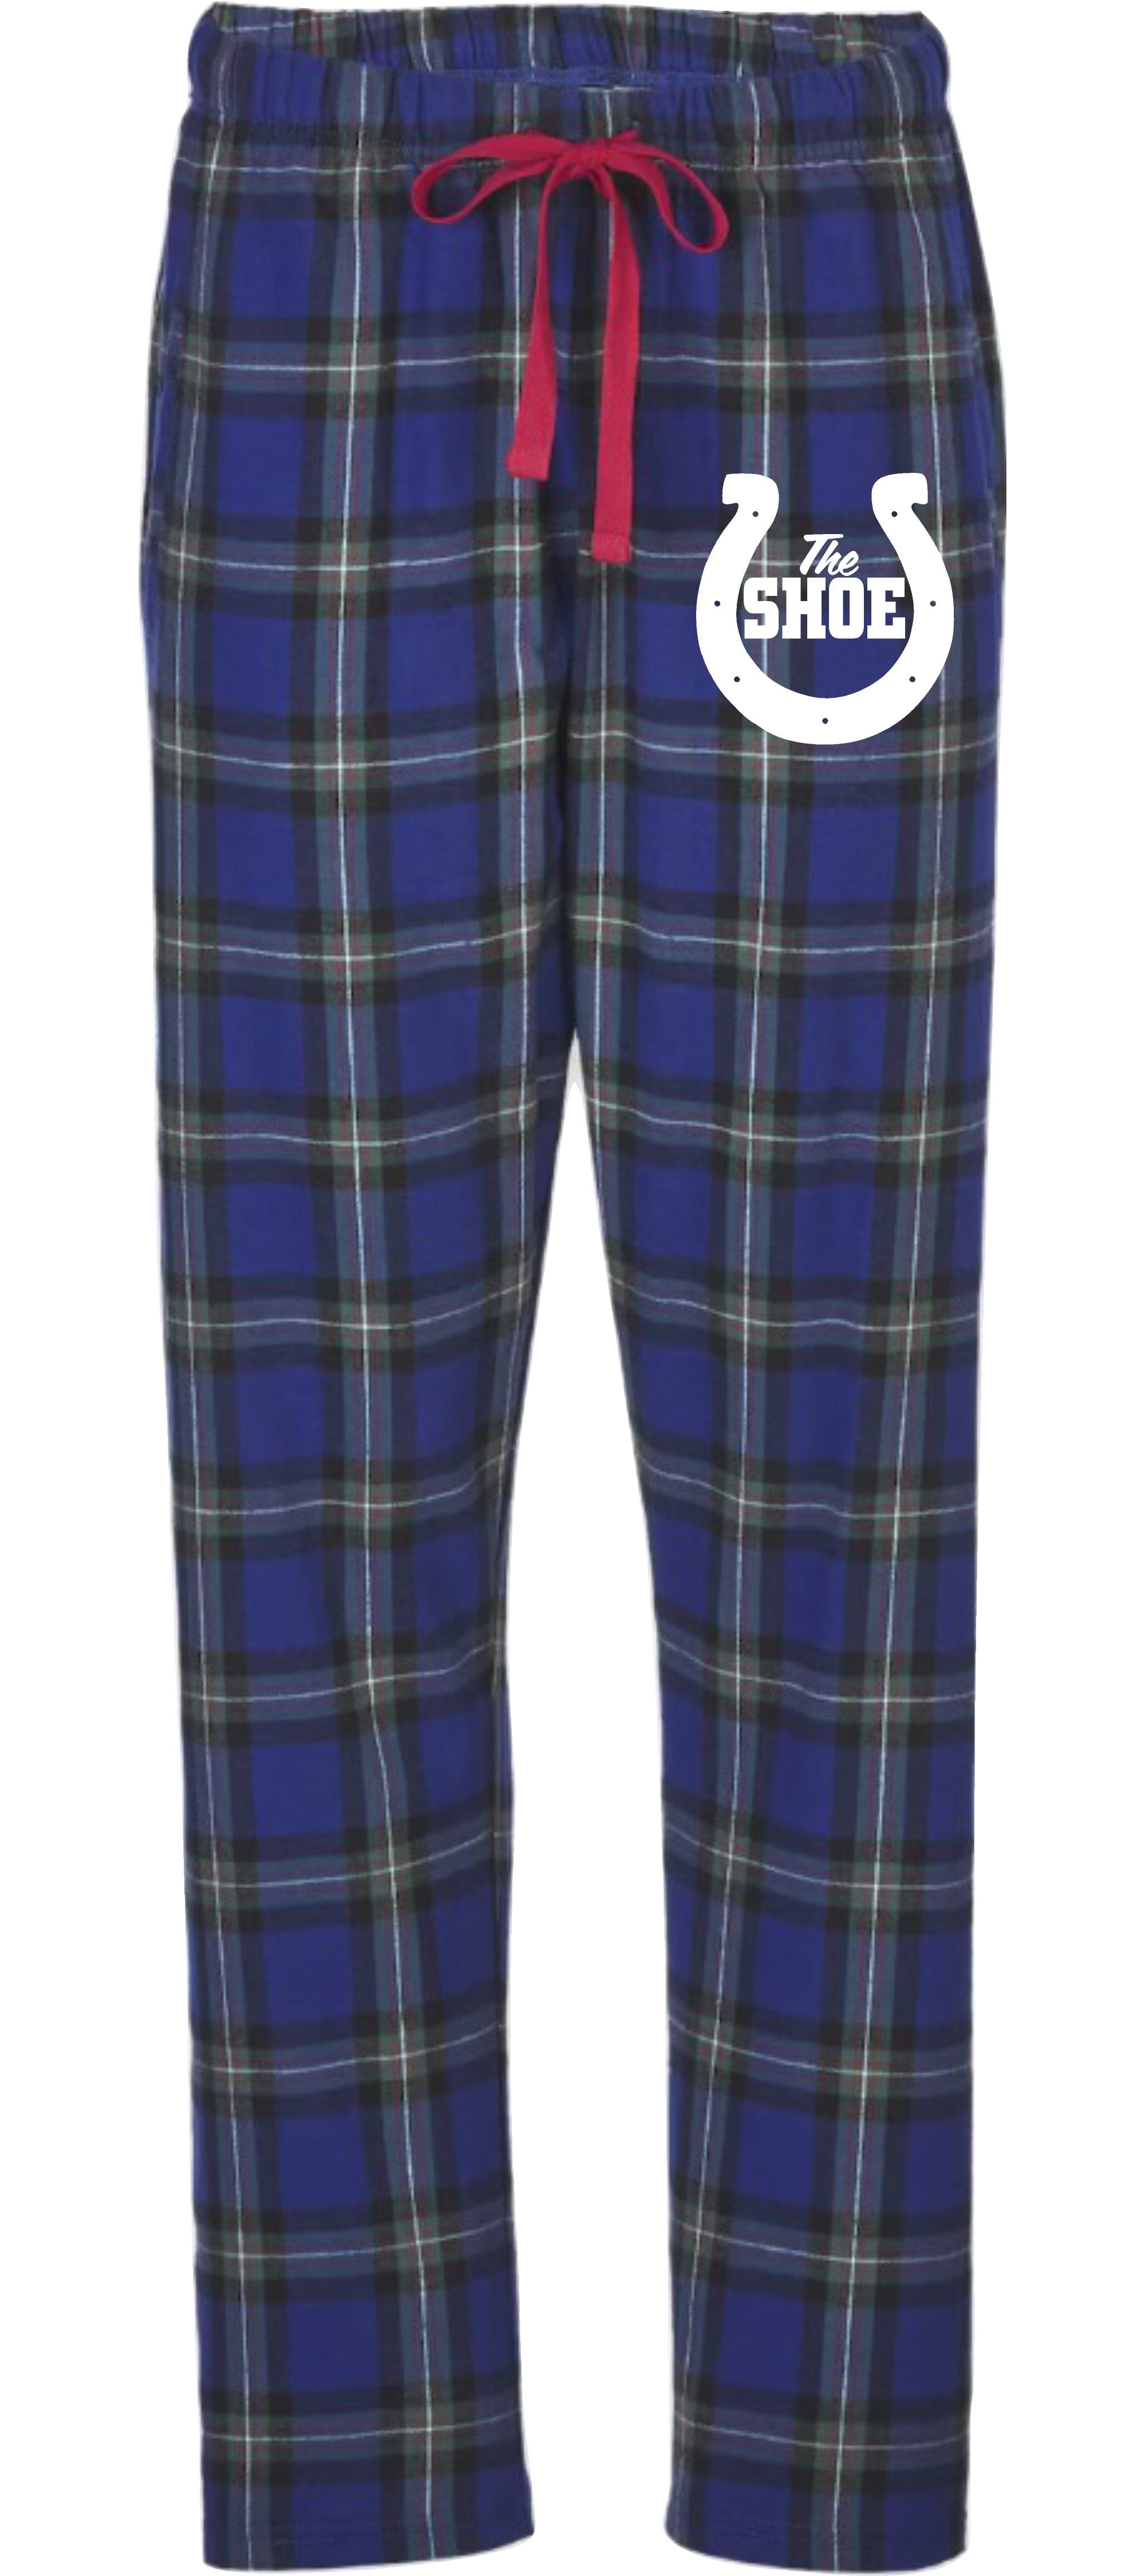 Boxercraft Youth PJ Flannel Pajama Pants in 6 Plaid Colors, Kids